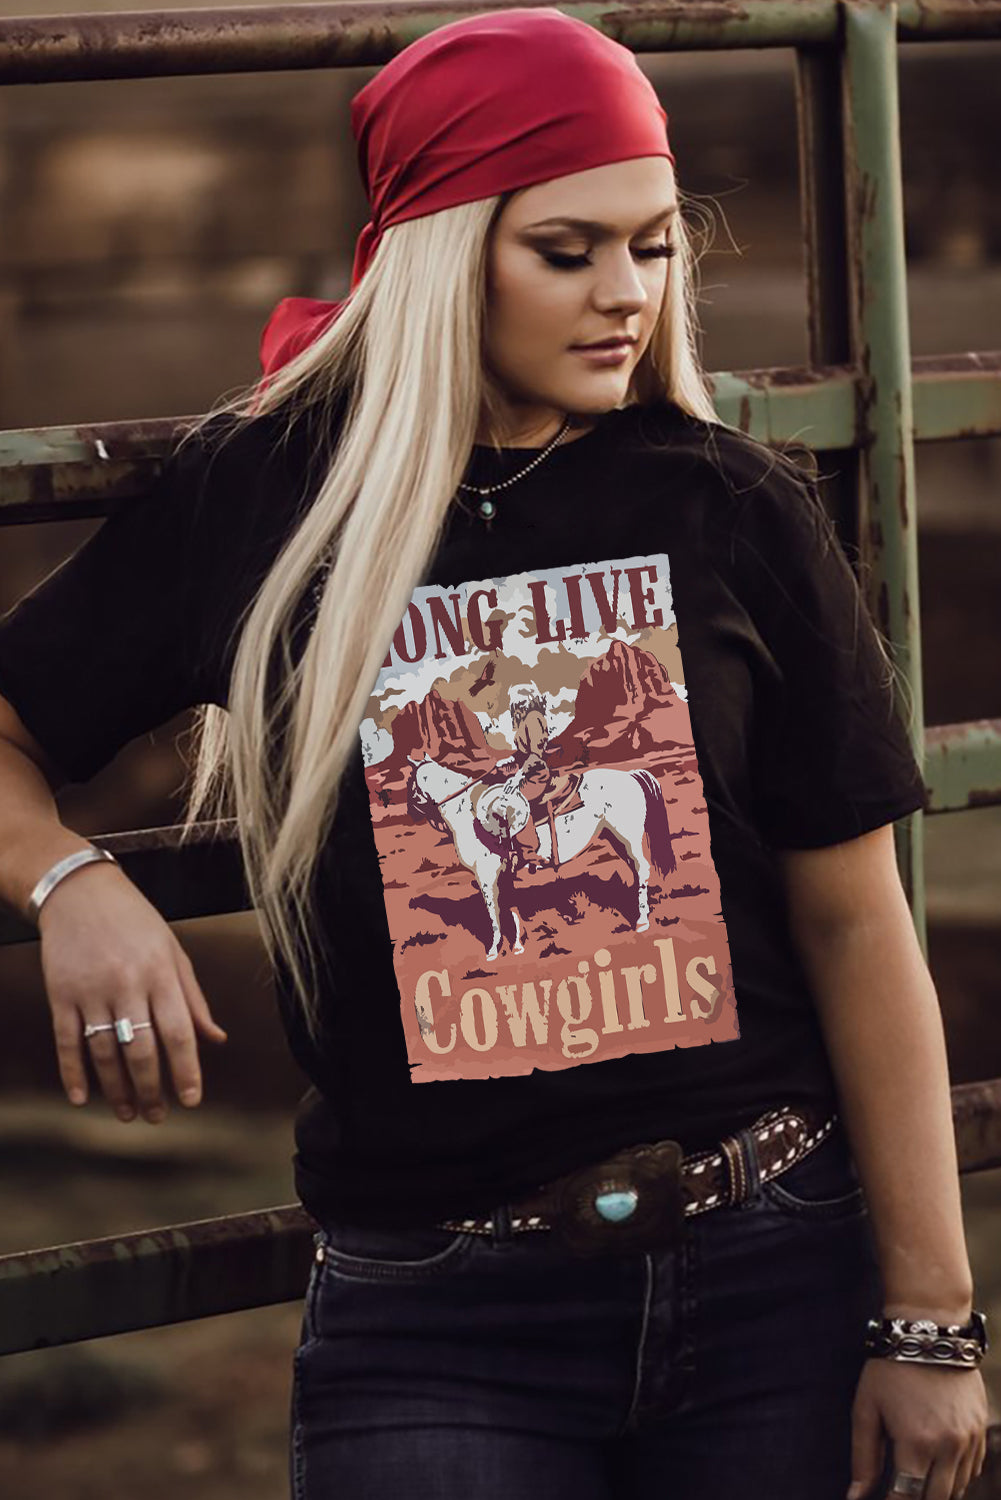 Black LONG LIVE Cowgirls Graphic Tee